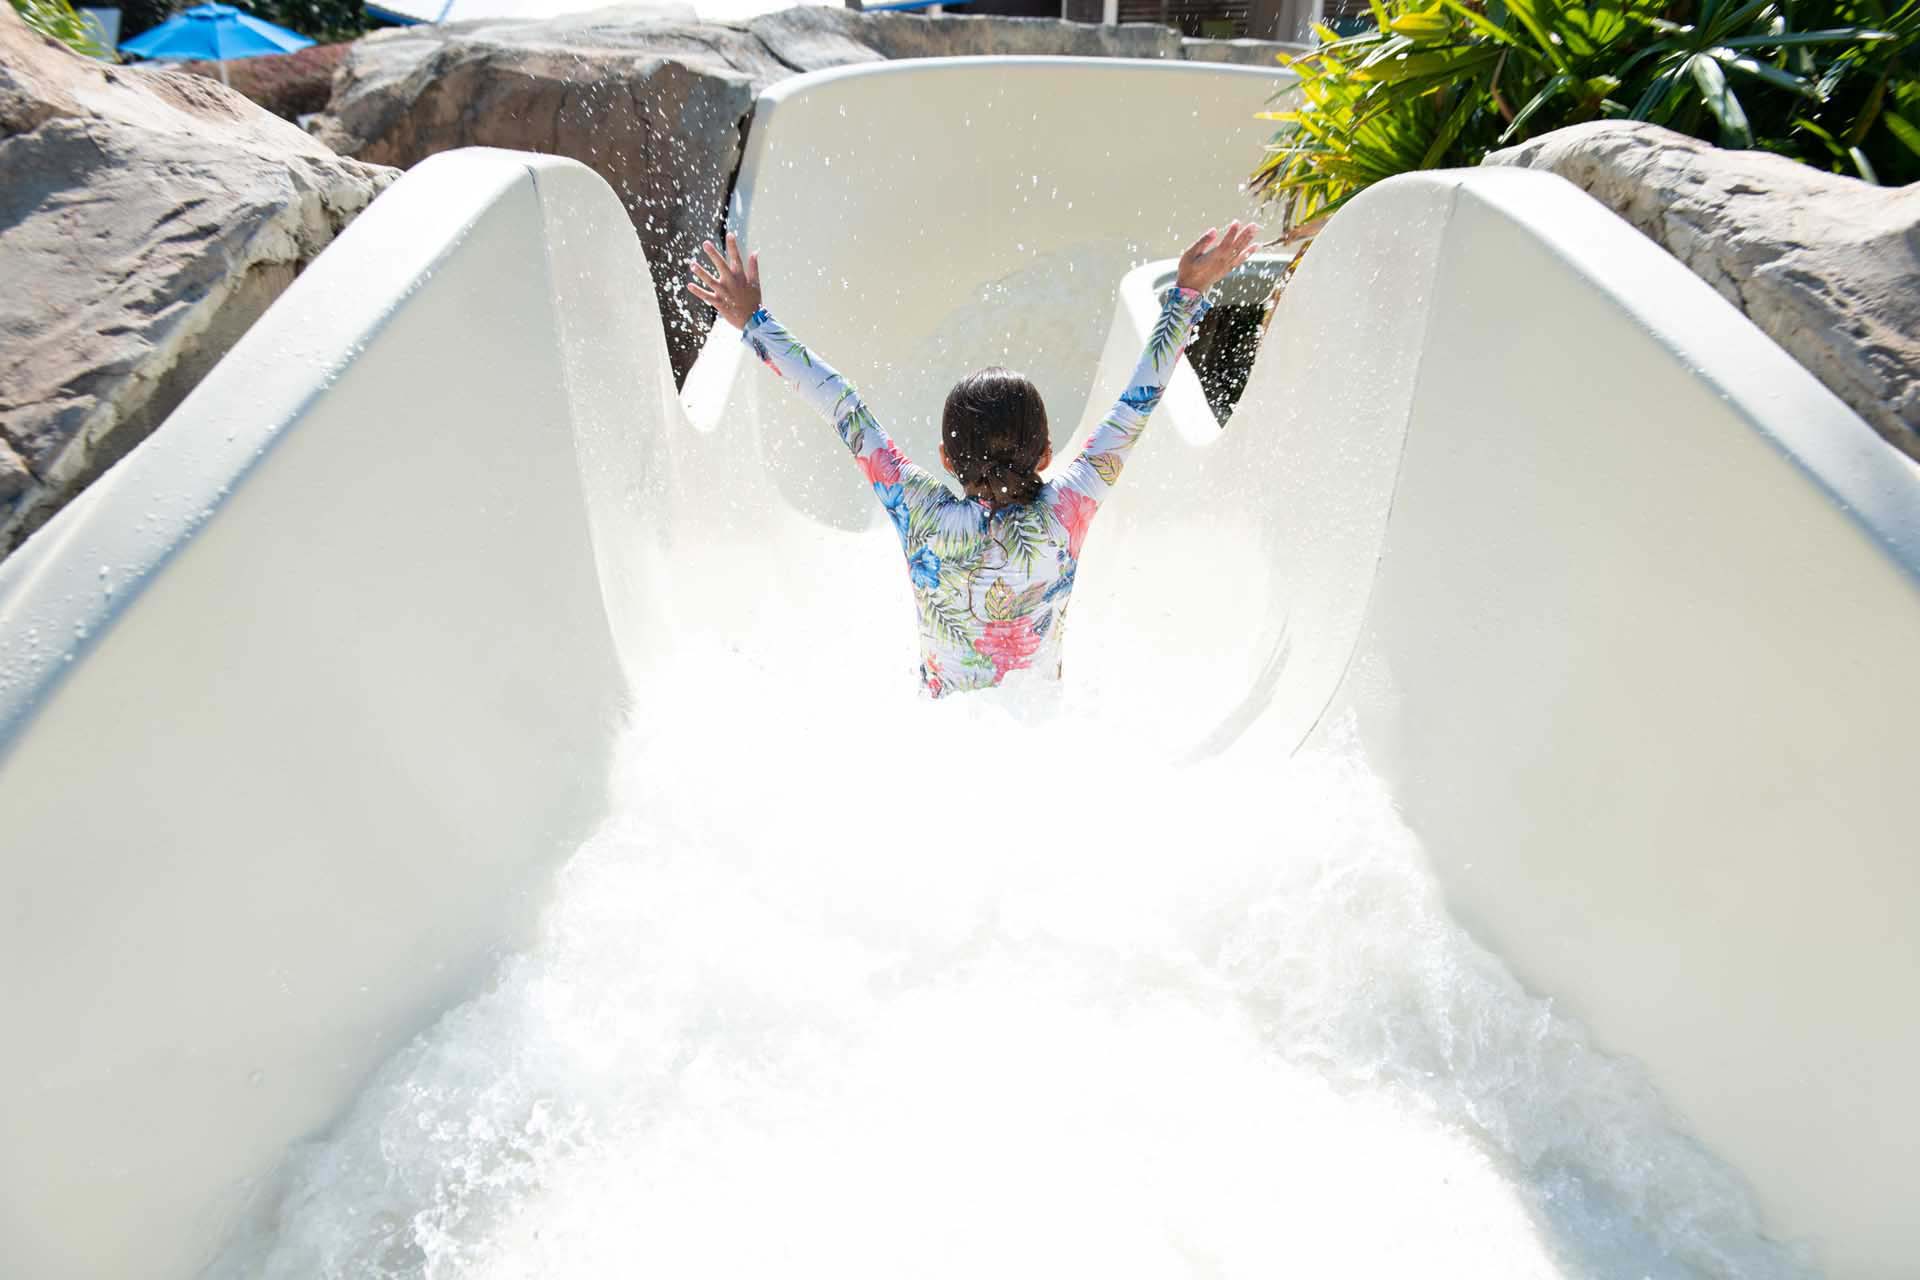 Young girl going down the water slide at the Reunion Resort Water Park